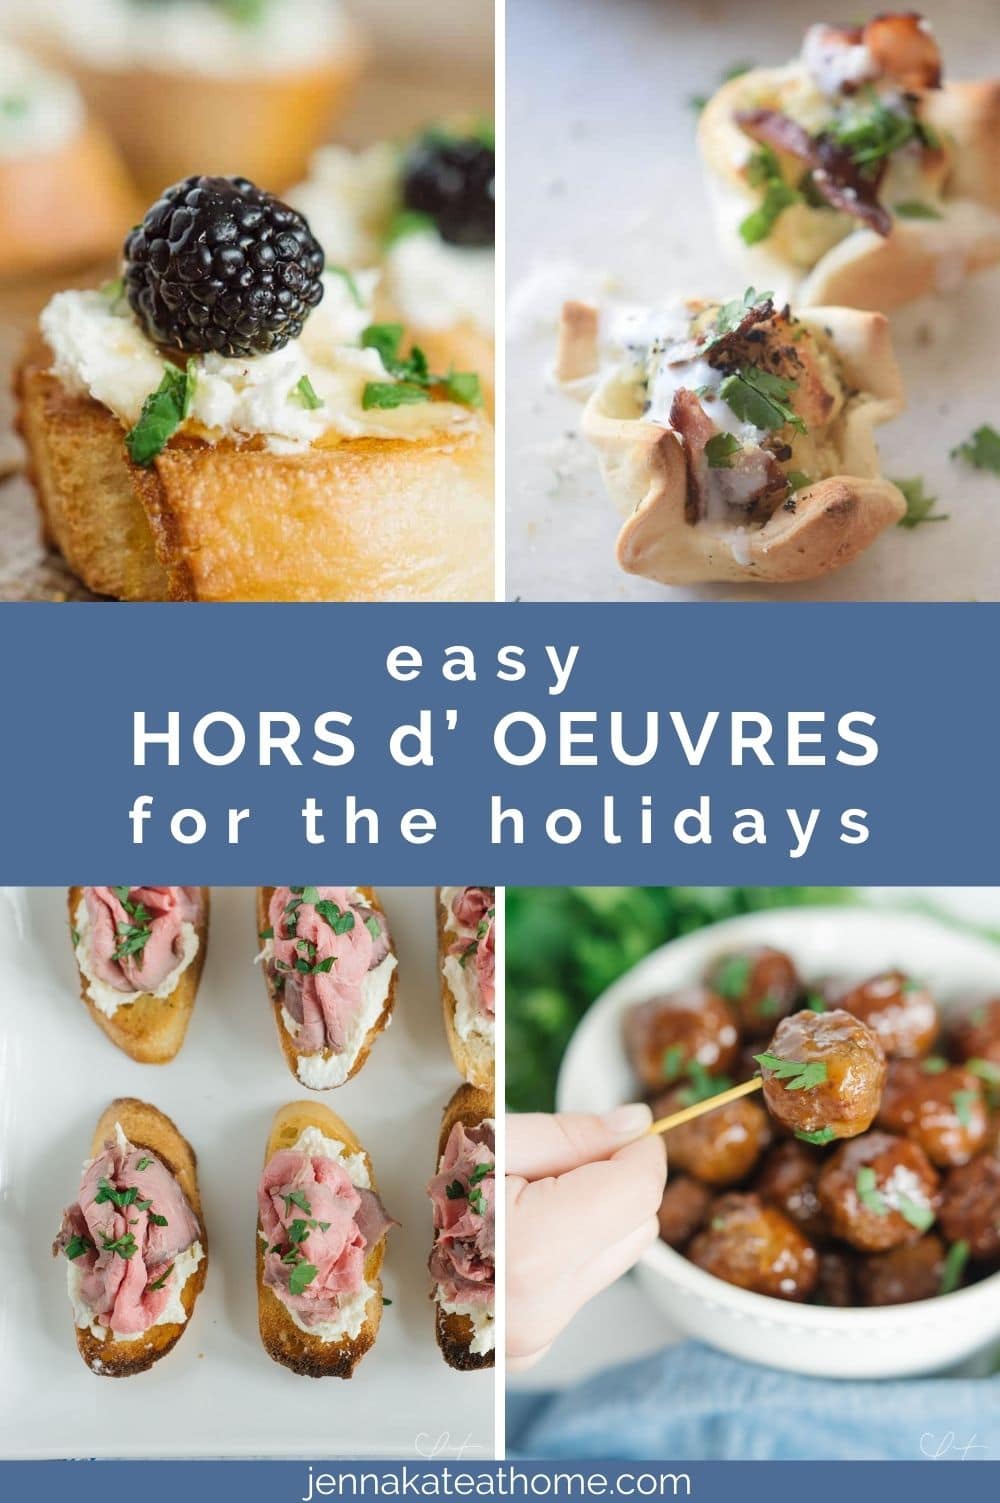 easy Hors d’ oeuvres